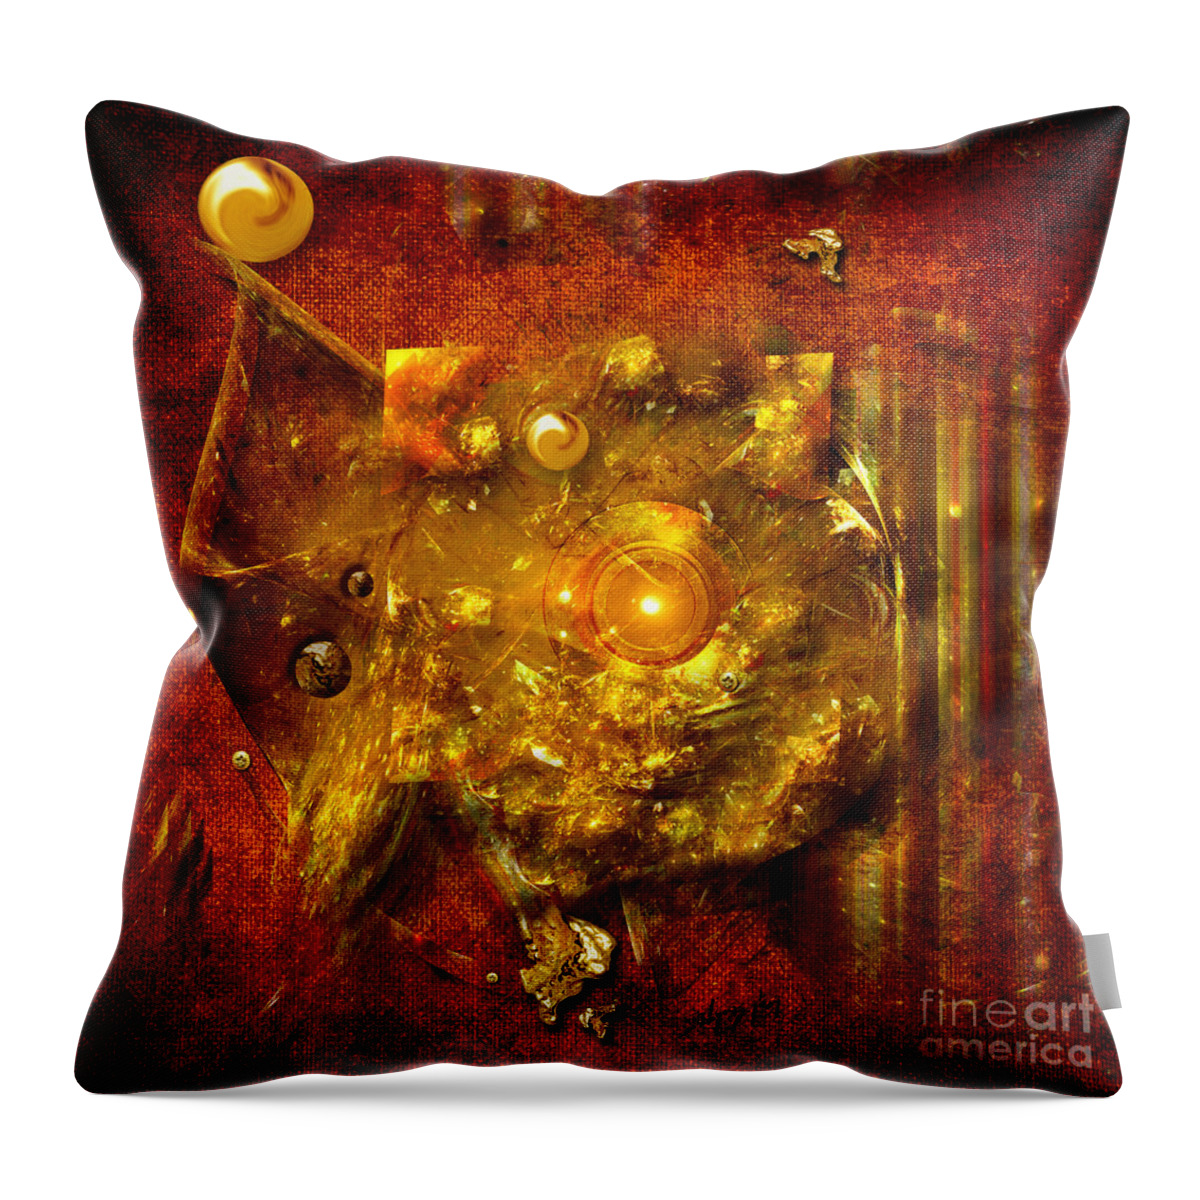 Gold Throw Pillow featuring the painting Dimension hole by Alexa Szlavics